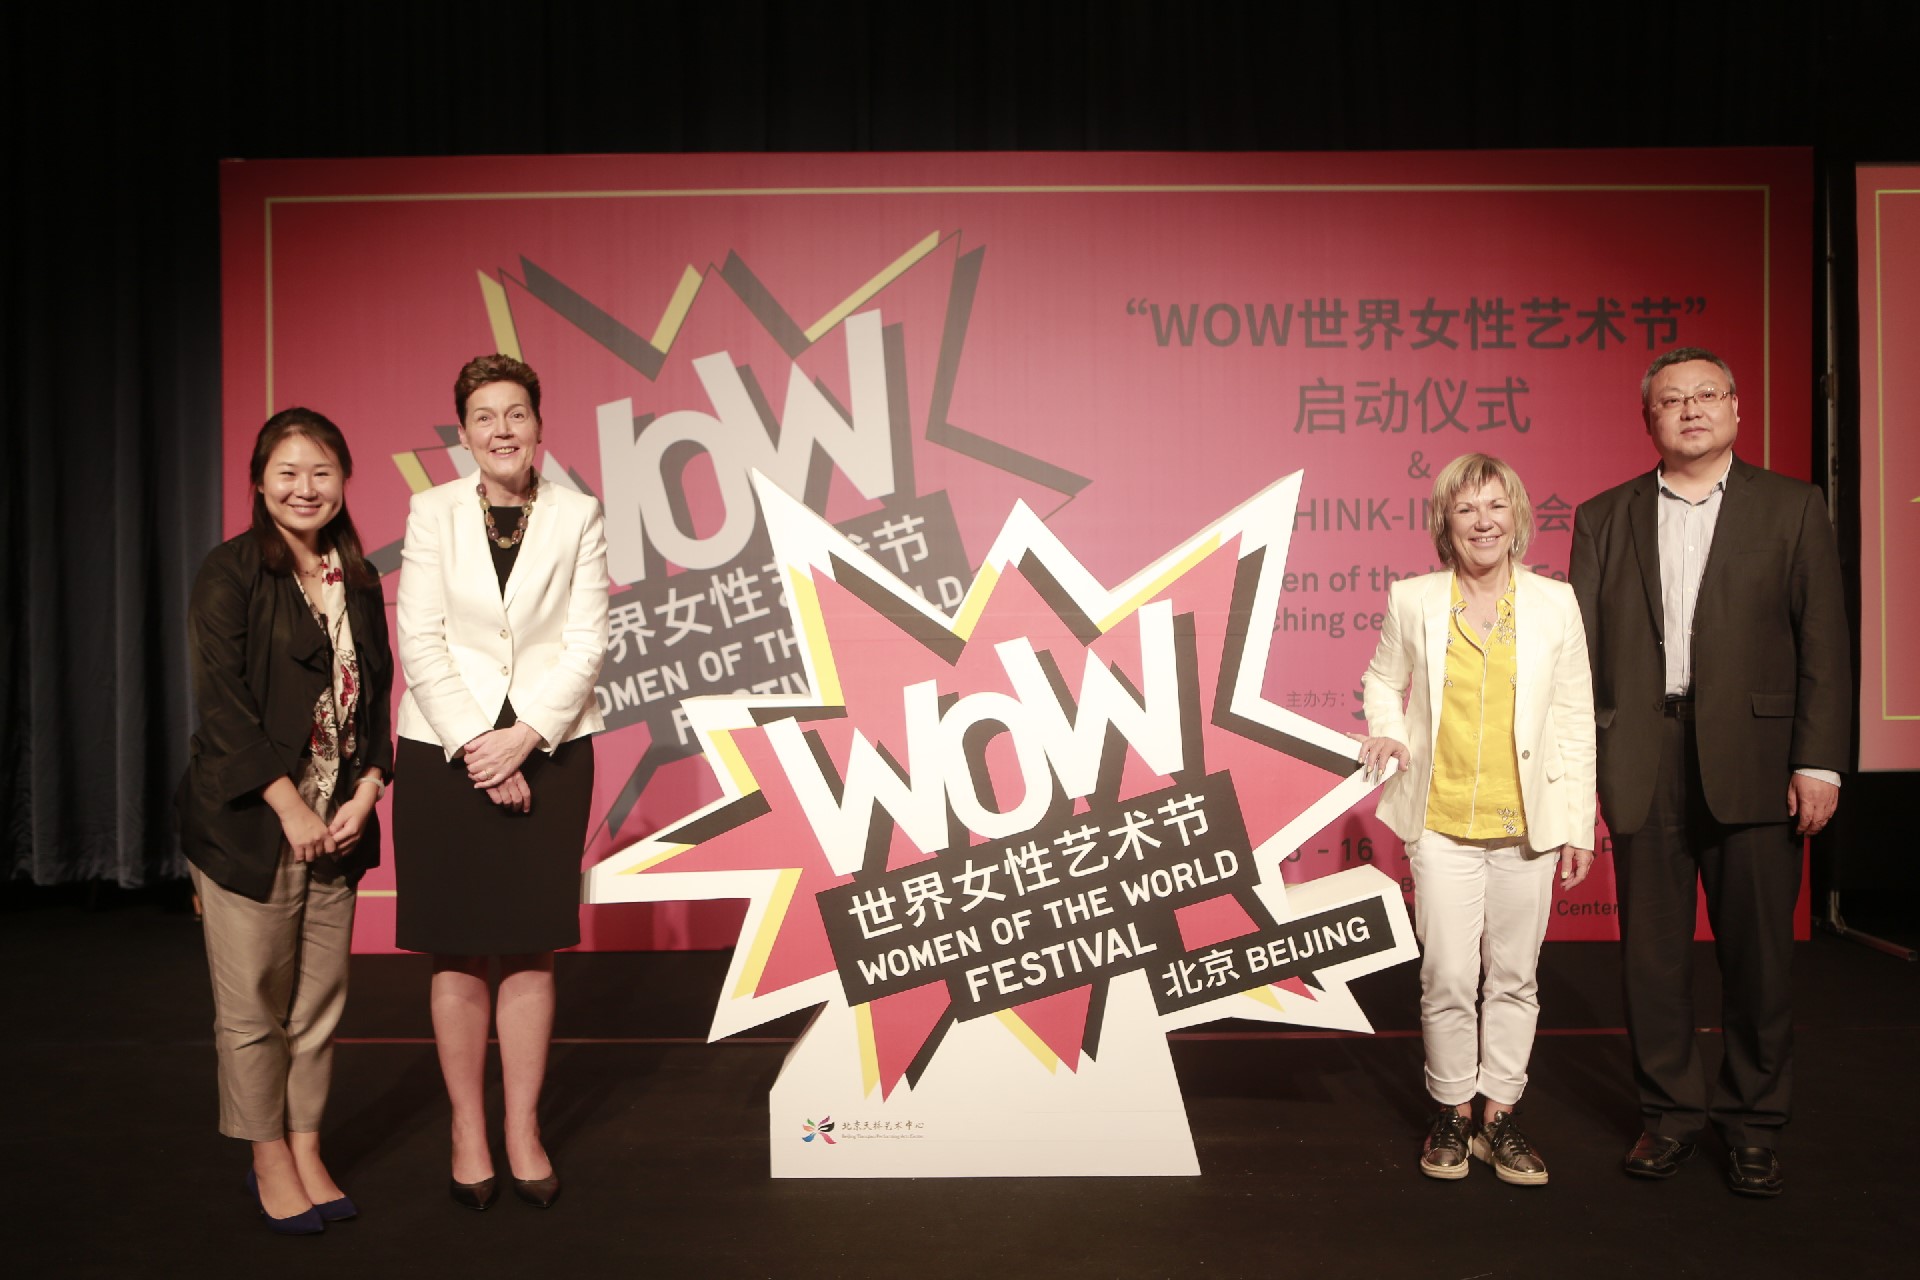 General manager of the Tianqiao Performing Arts Center Zhang Li (right), Artistic Director of London's Southbank Centre Jude Kelly (2nd from right) launch the WOW-Women of the World festival in Beijing on Saturday, April 15, 2017. [Photo provided to China Plus]